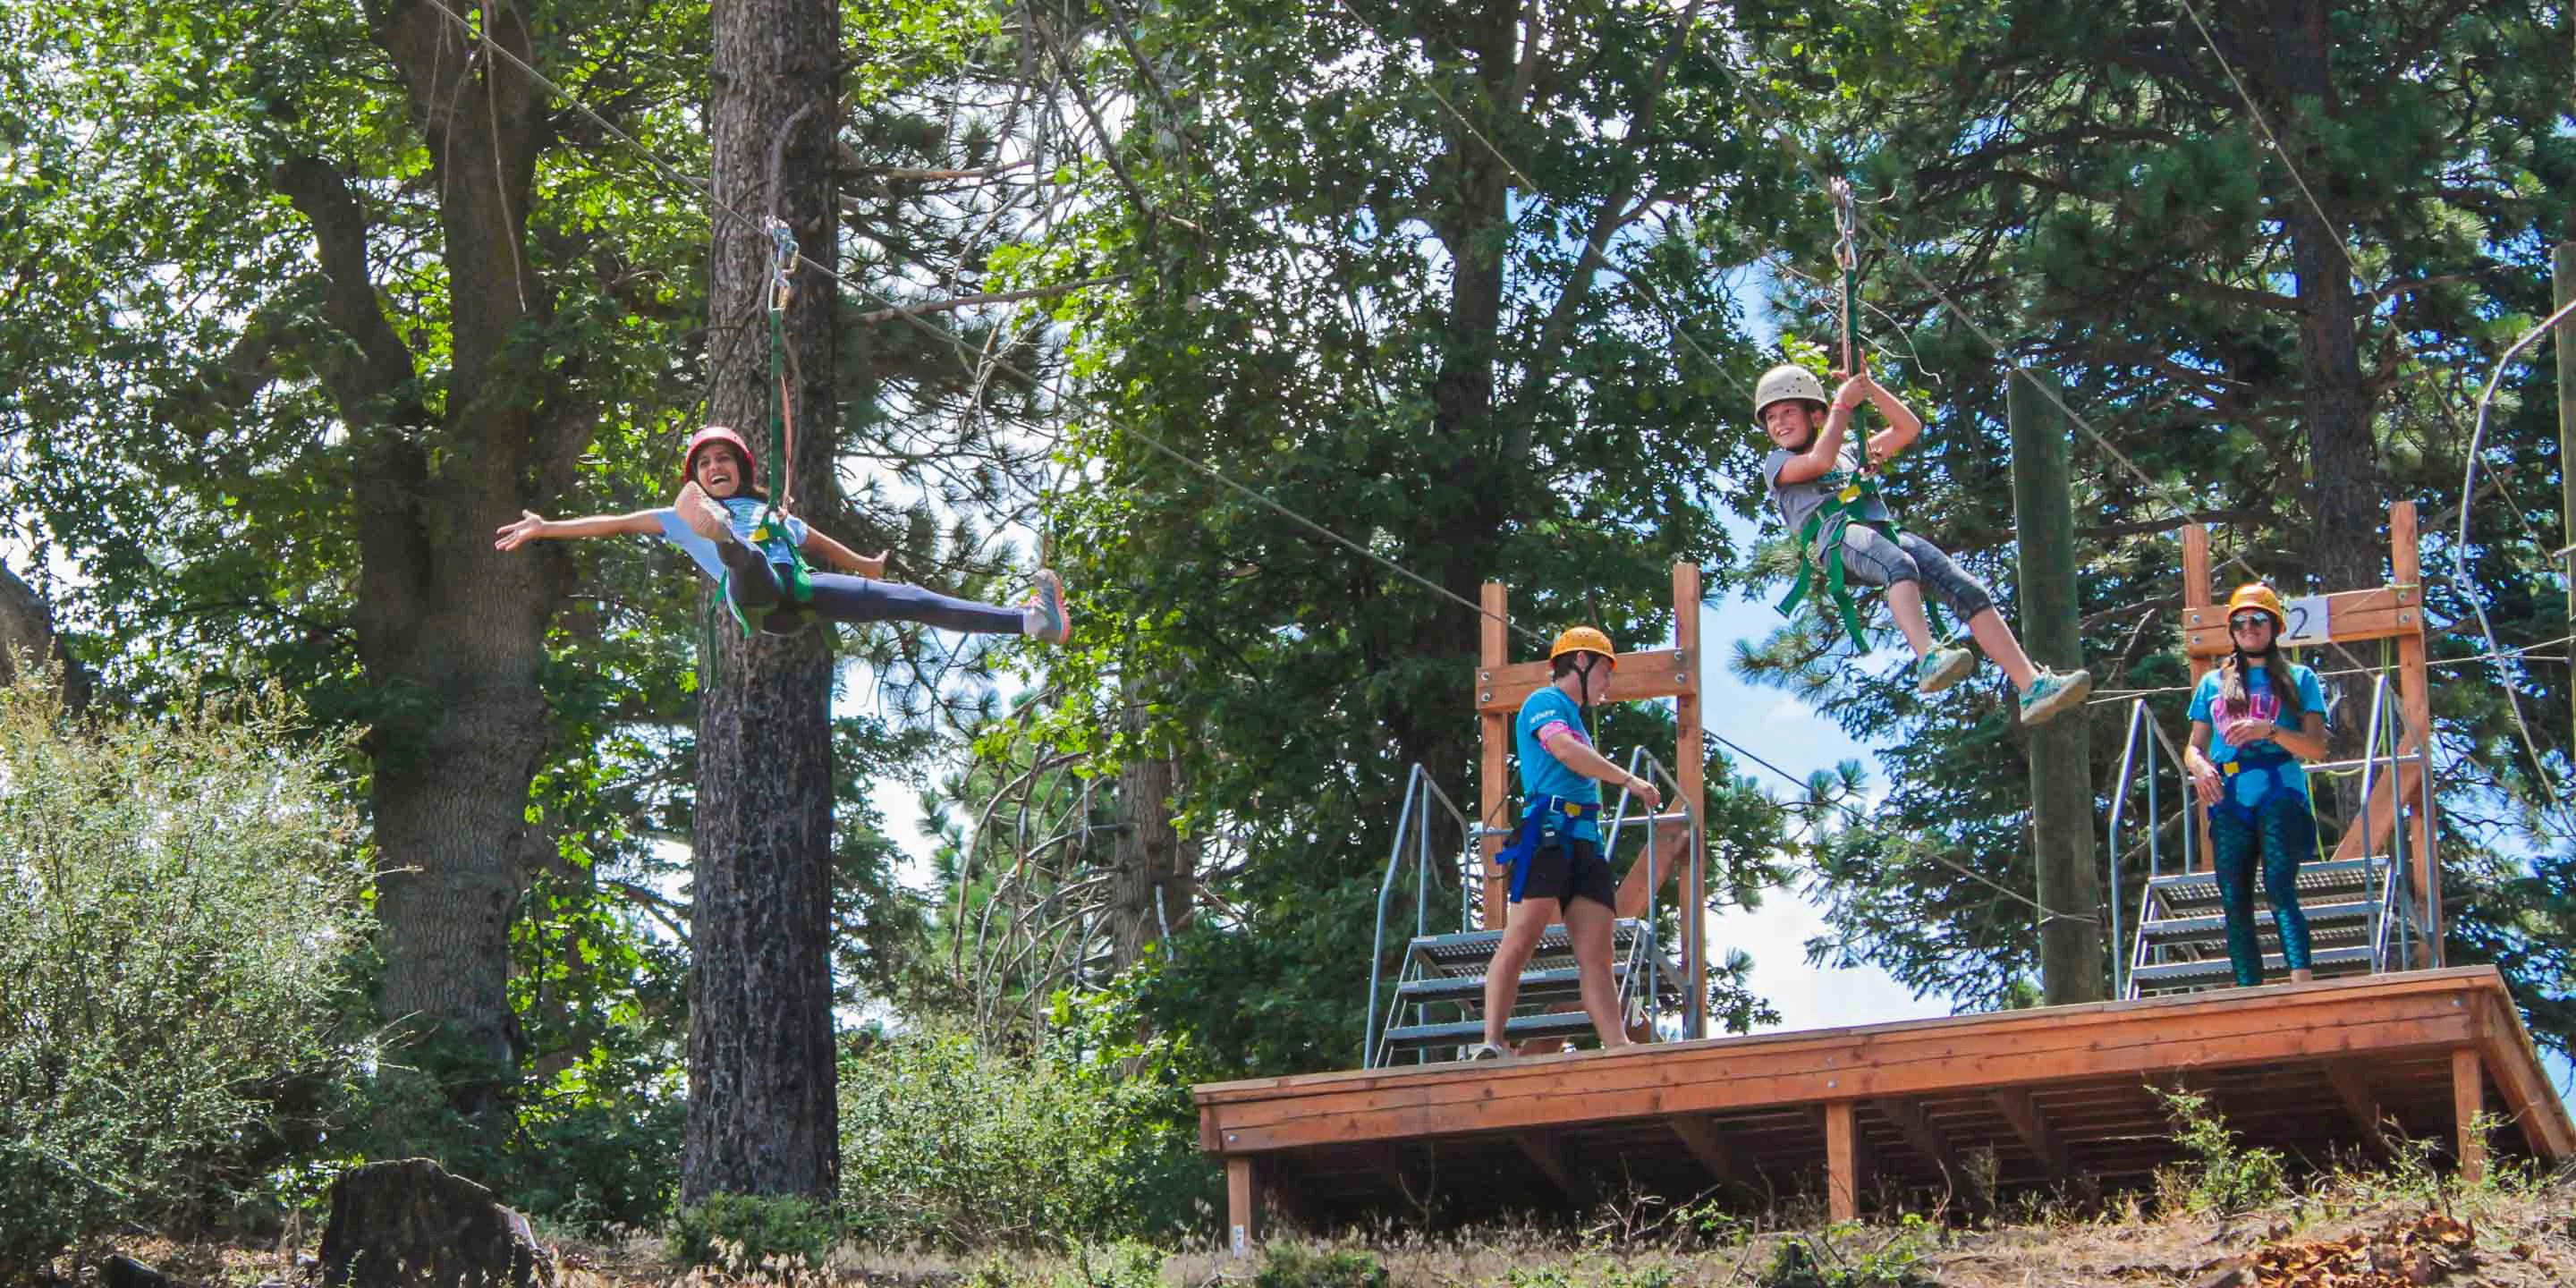 Two campers on zip line with staff in background